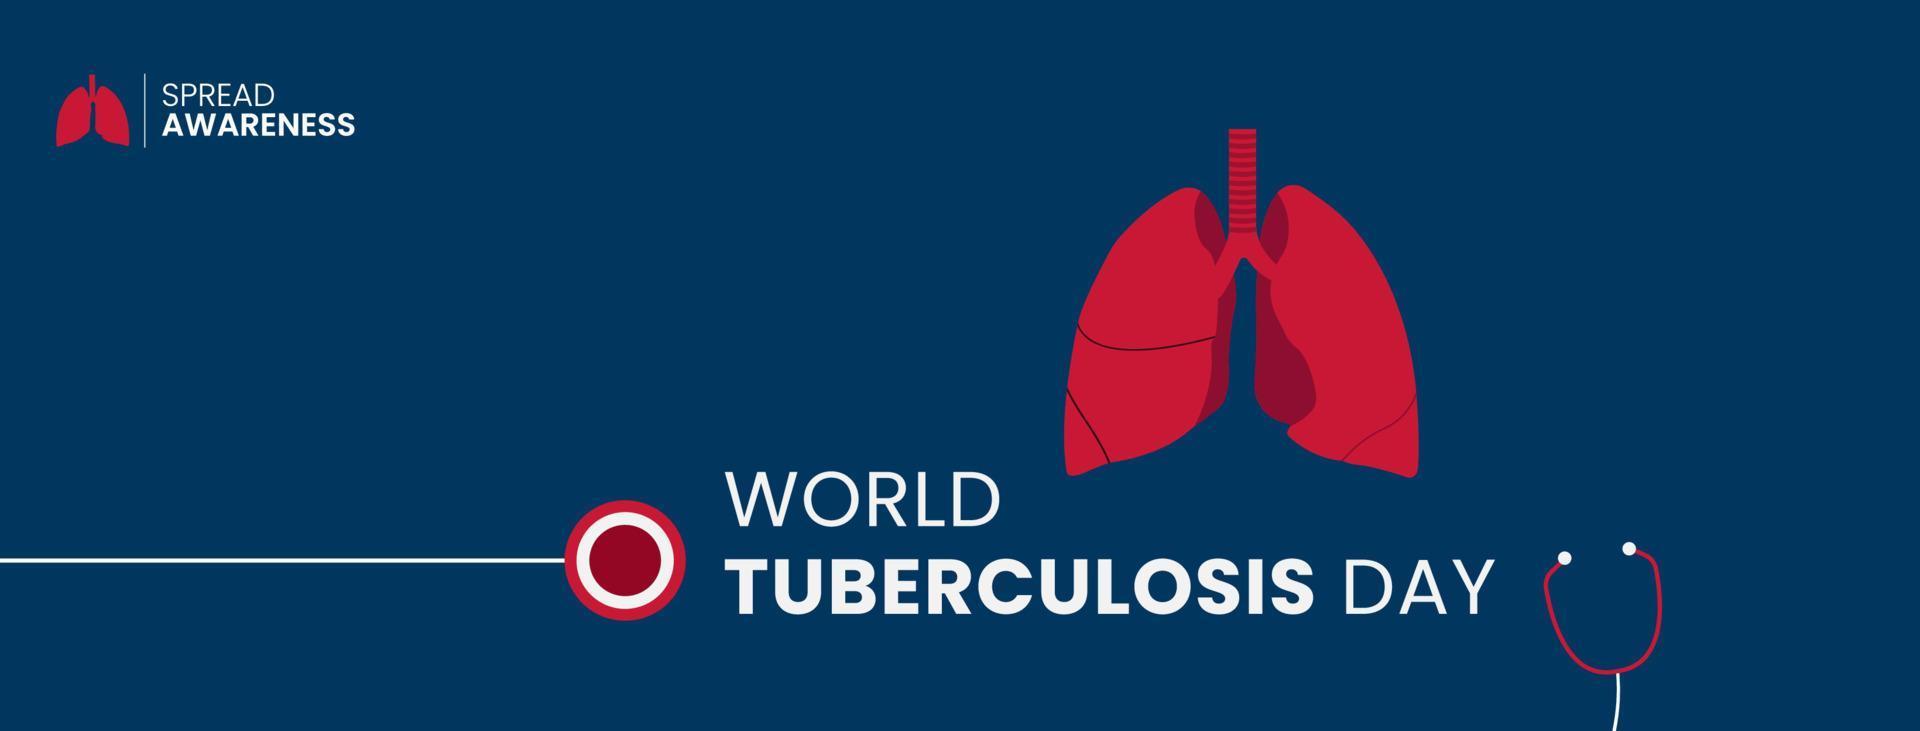 World tuberculosis day awareness about tuberculosis design vector